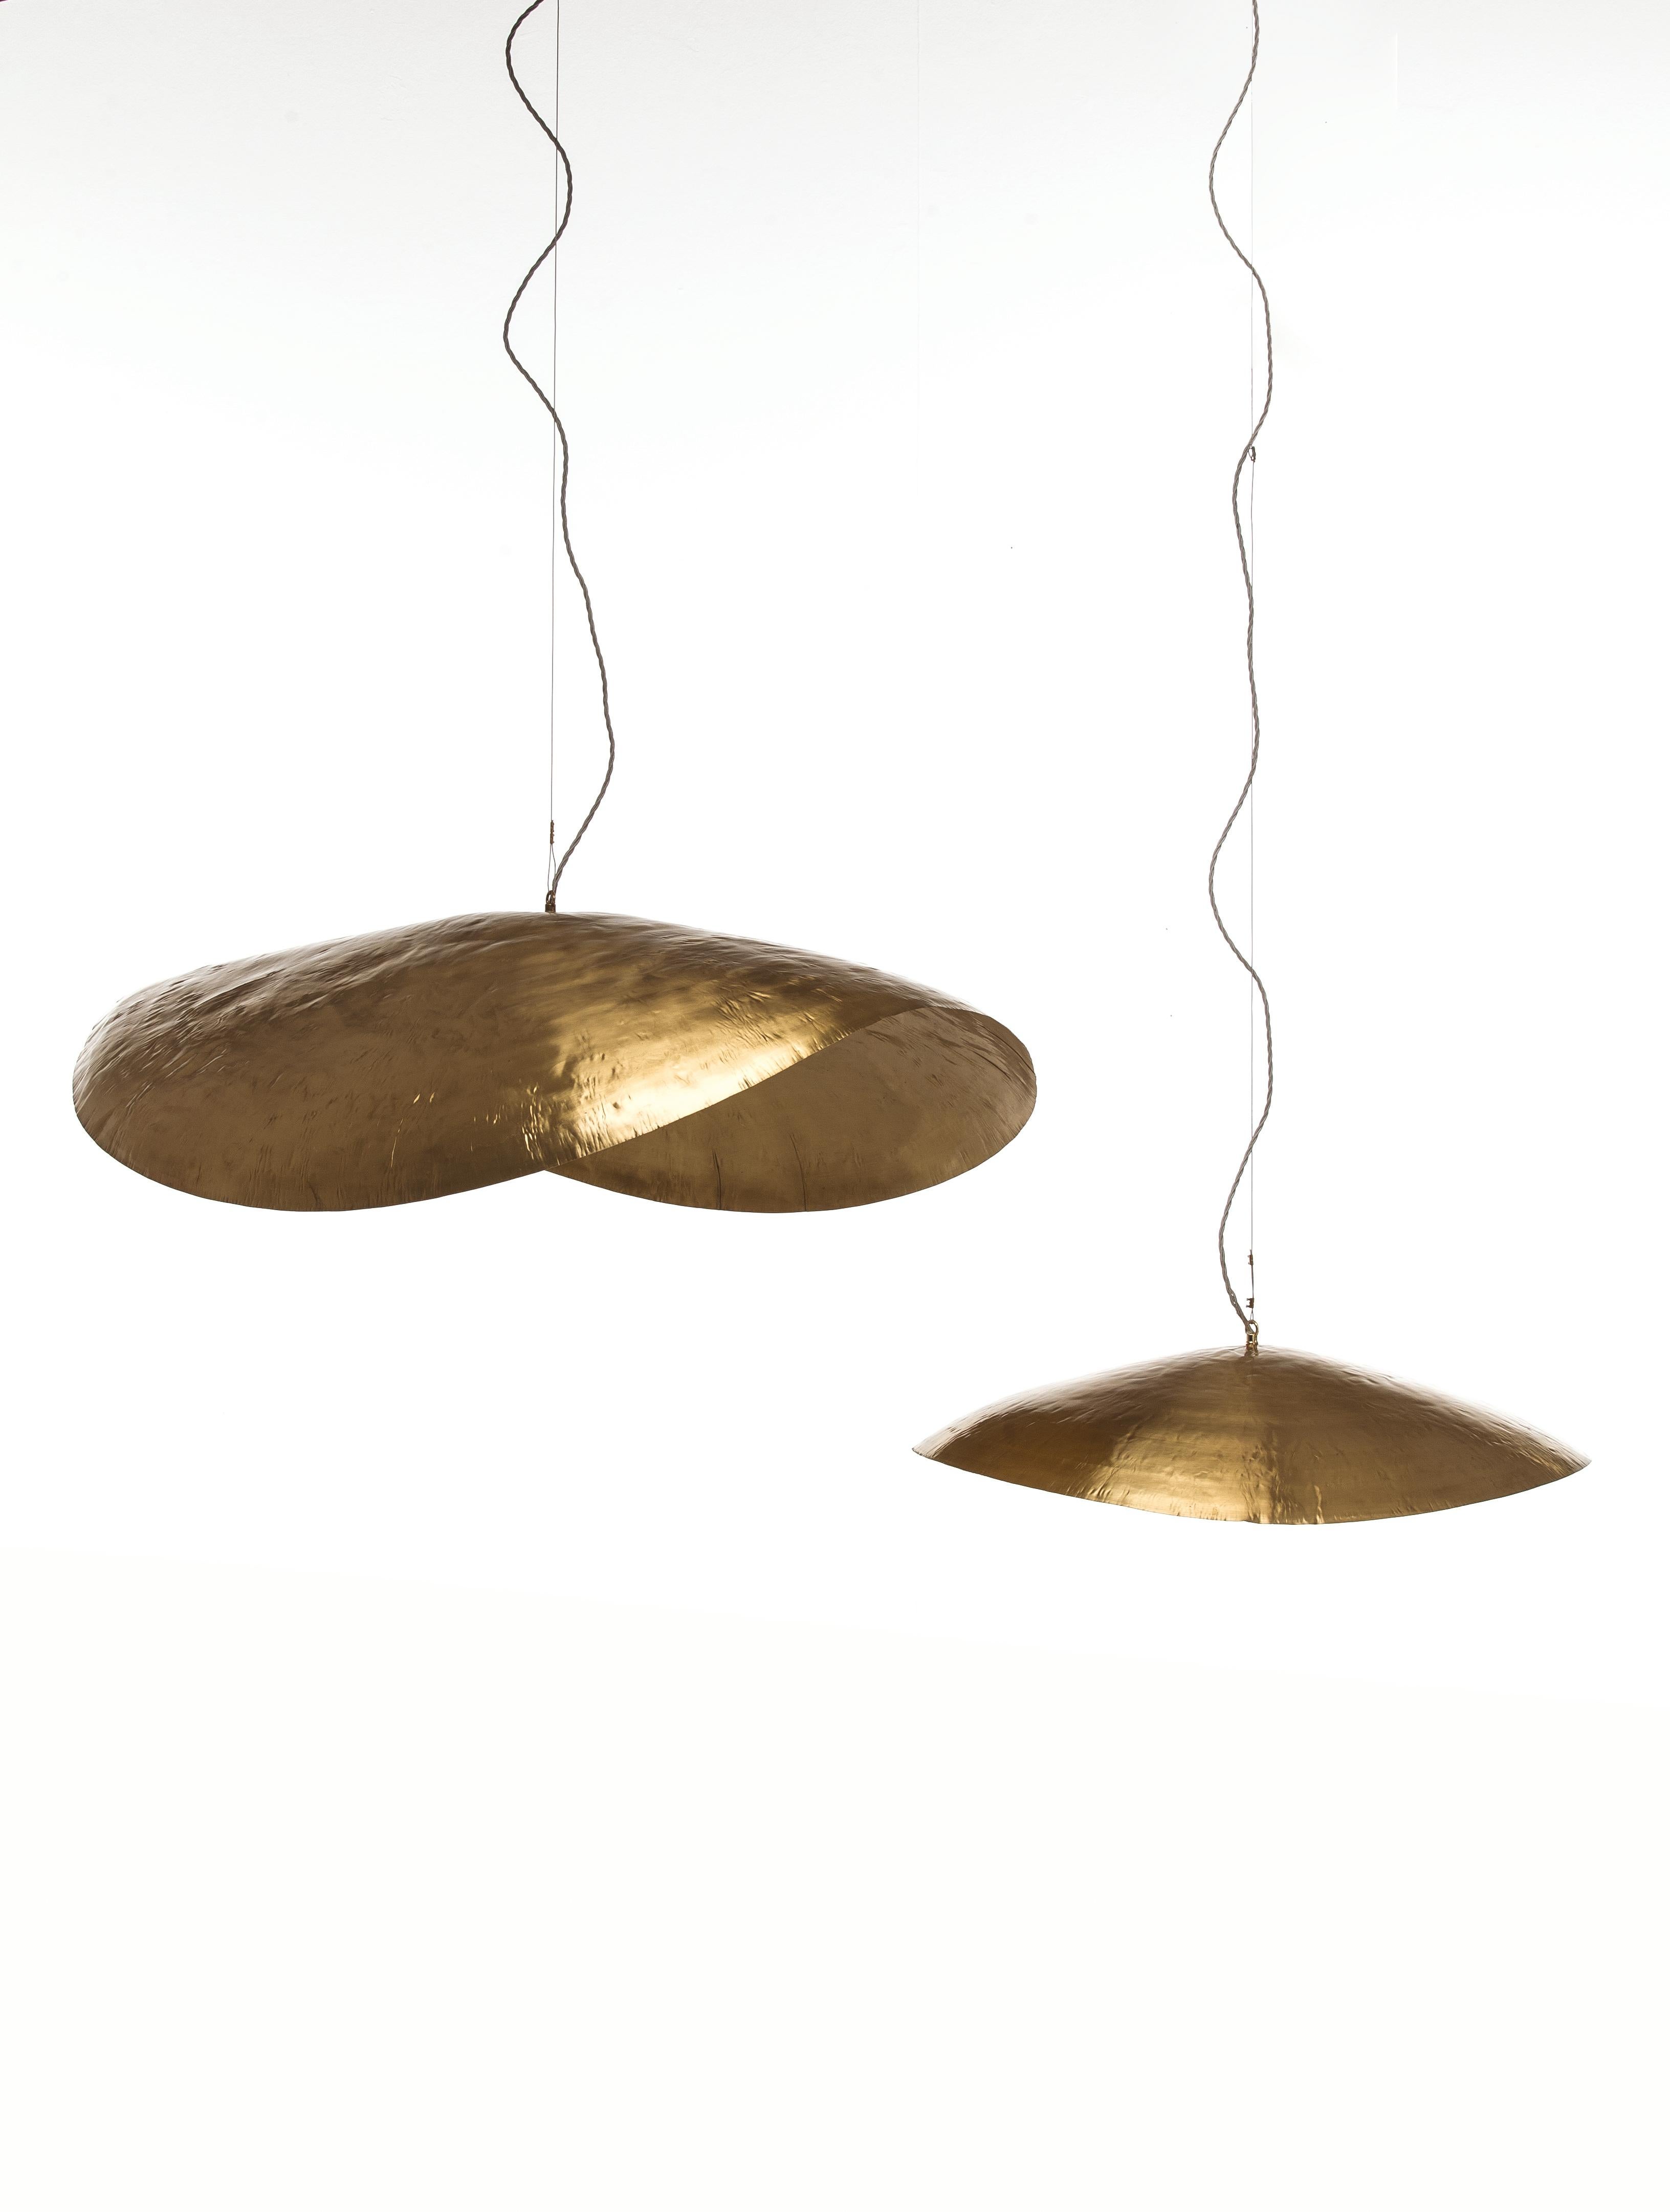 With a strong decorative impact, the BRASS lamp family exploits the ductility of brass and its ability to embellish interiors with warm and golden light reflections. Suspension lamps have a delicate shape of great visual appeal: a light brass disc